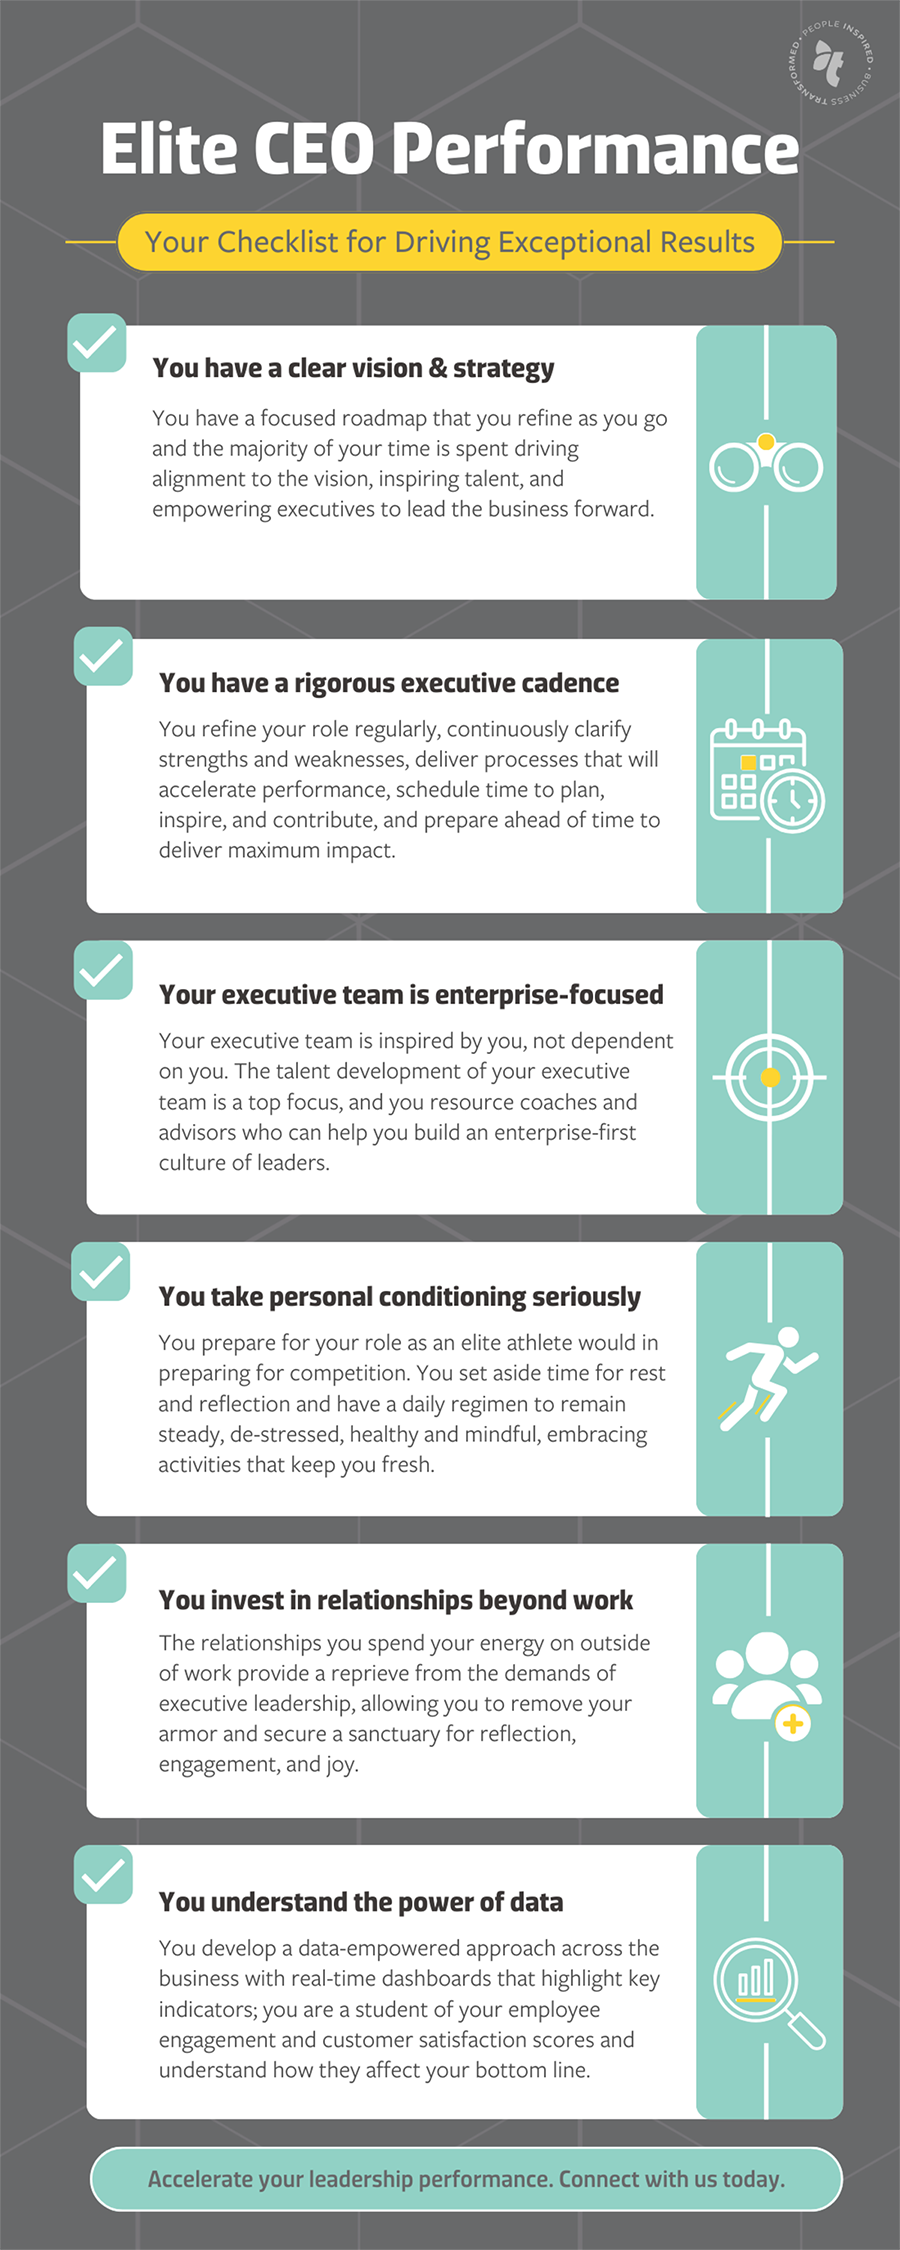 An infographic going over Elite CEO performance mindsets.